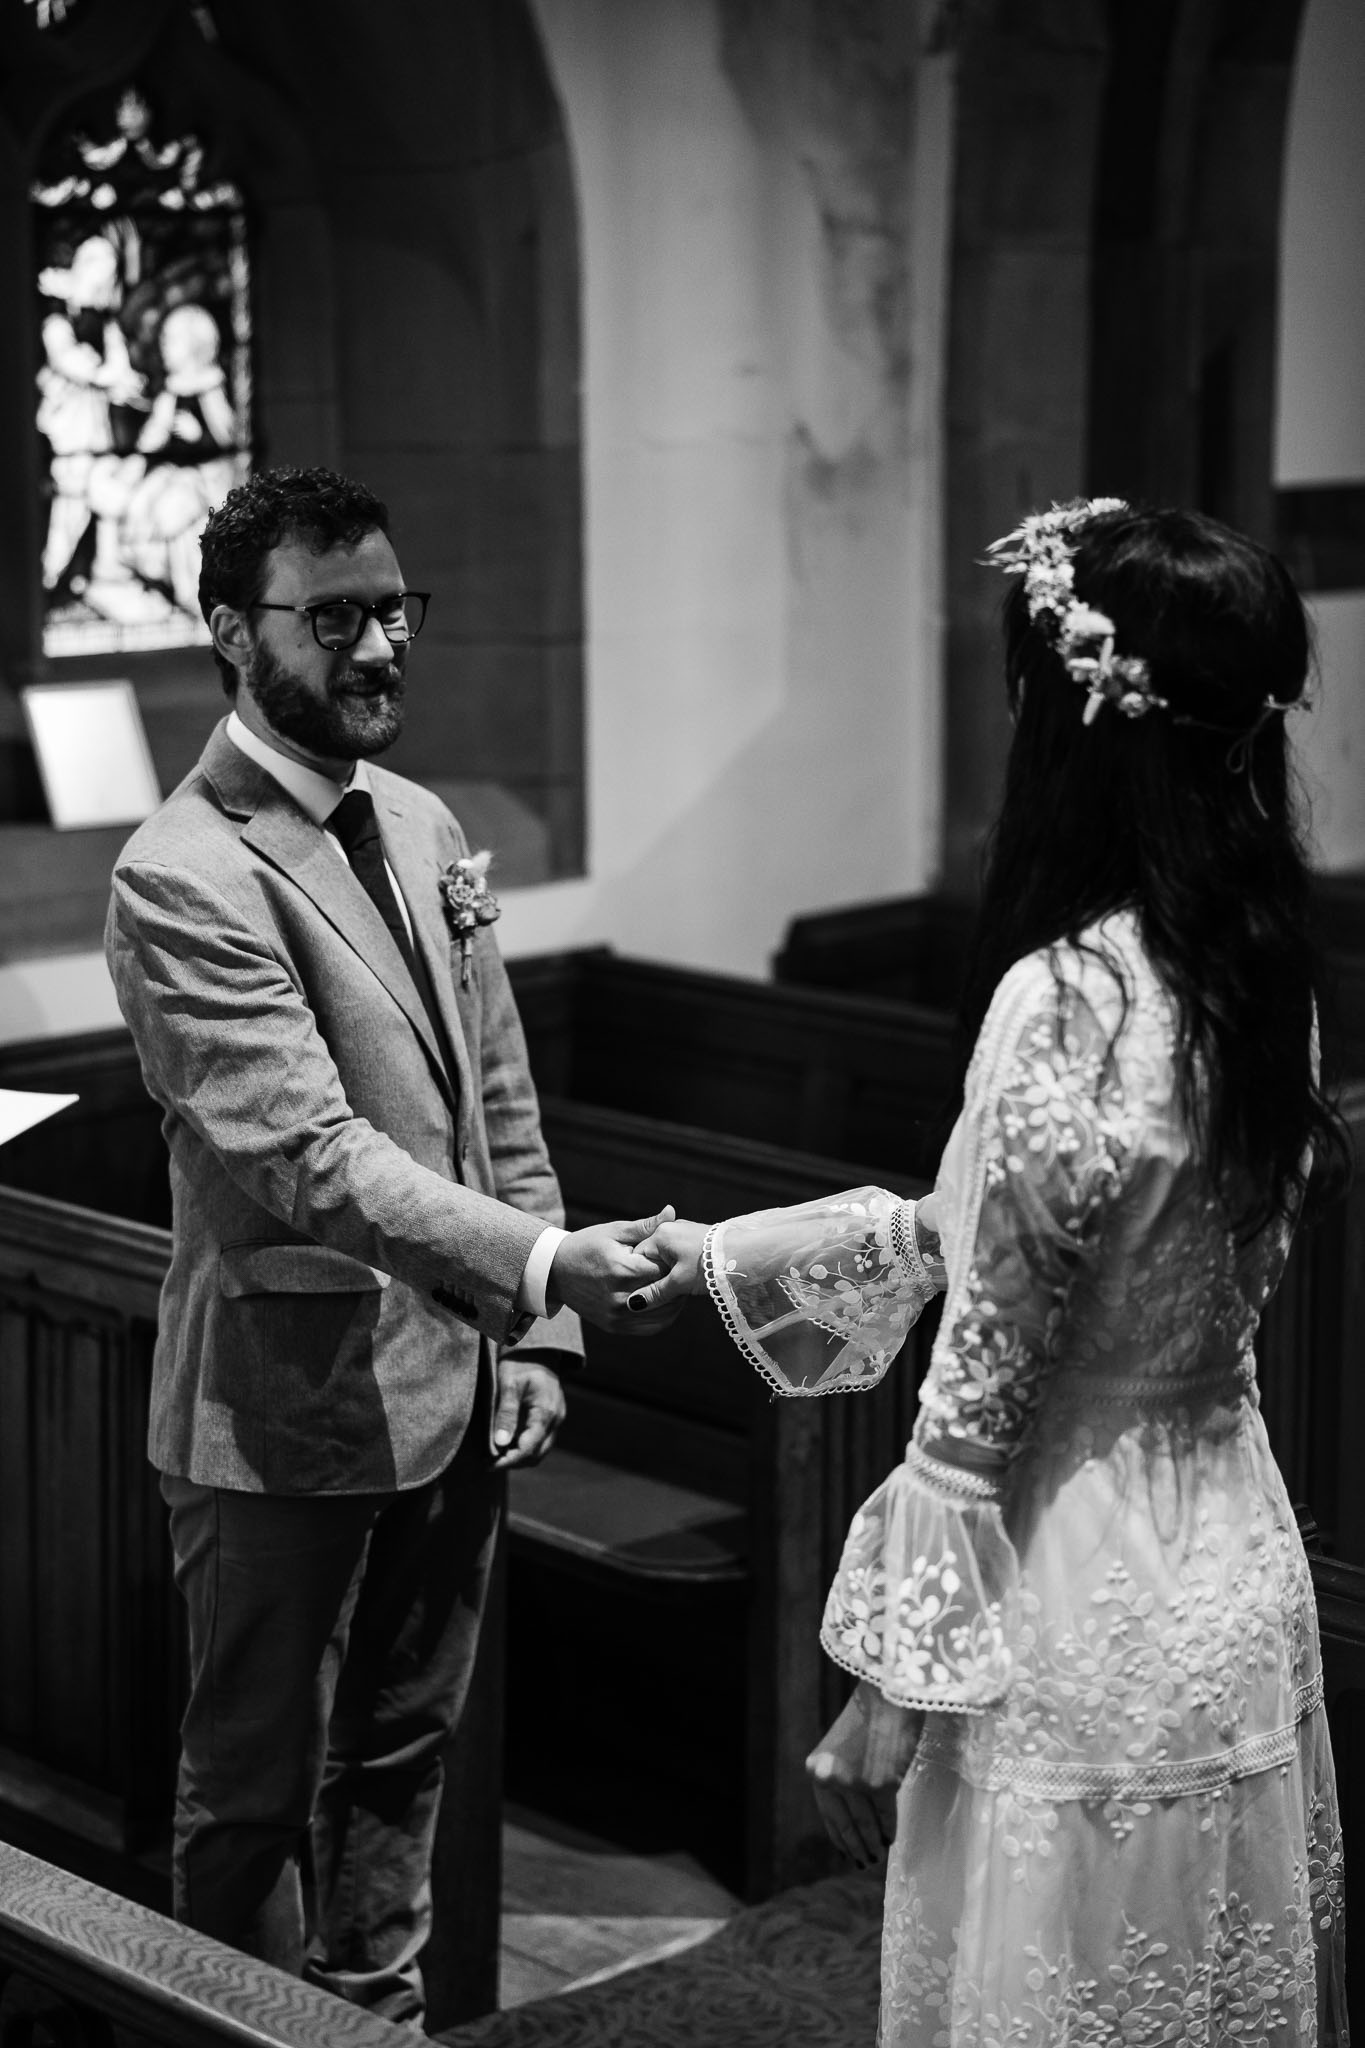 Married in church